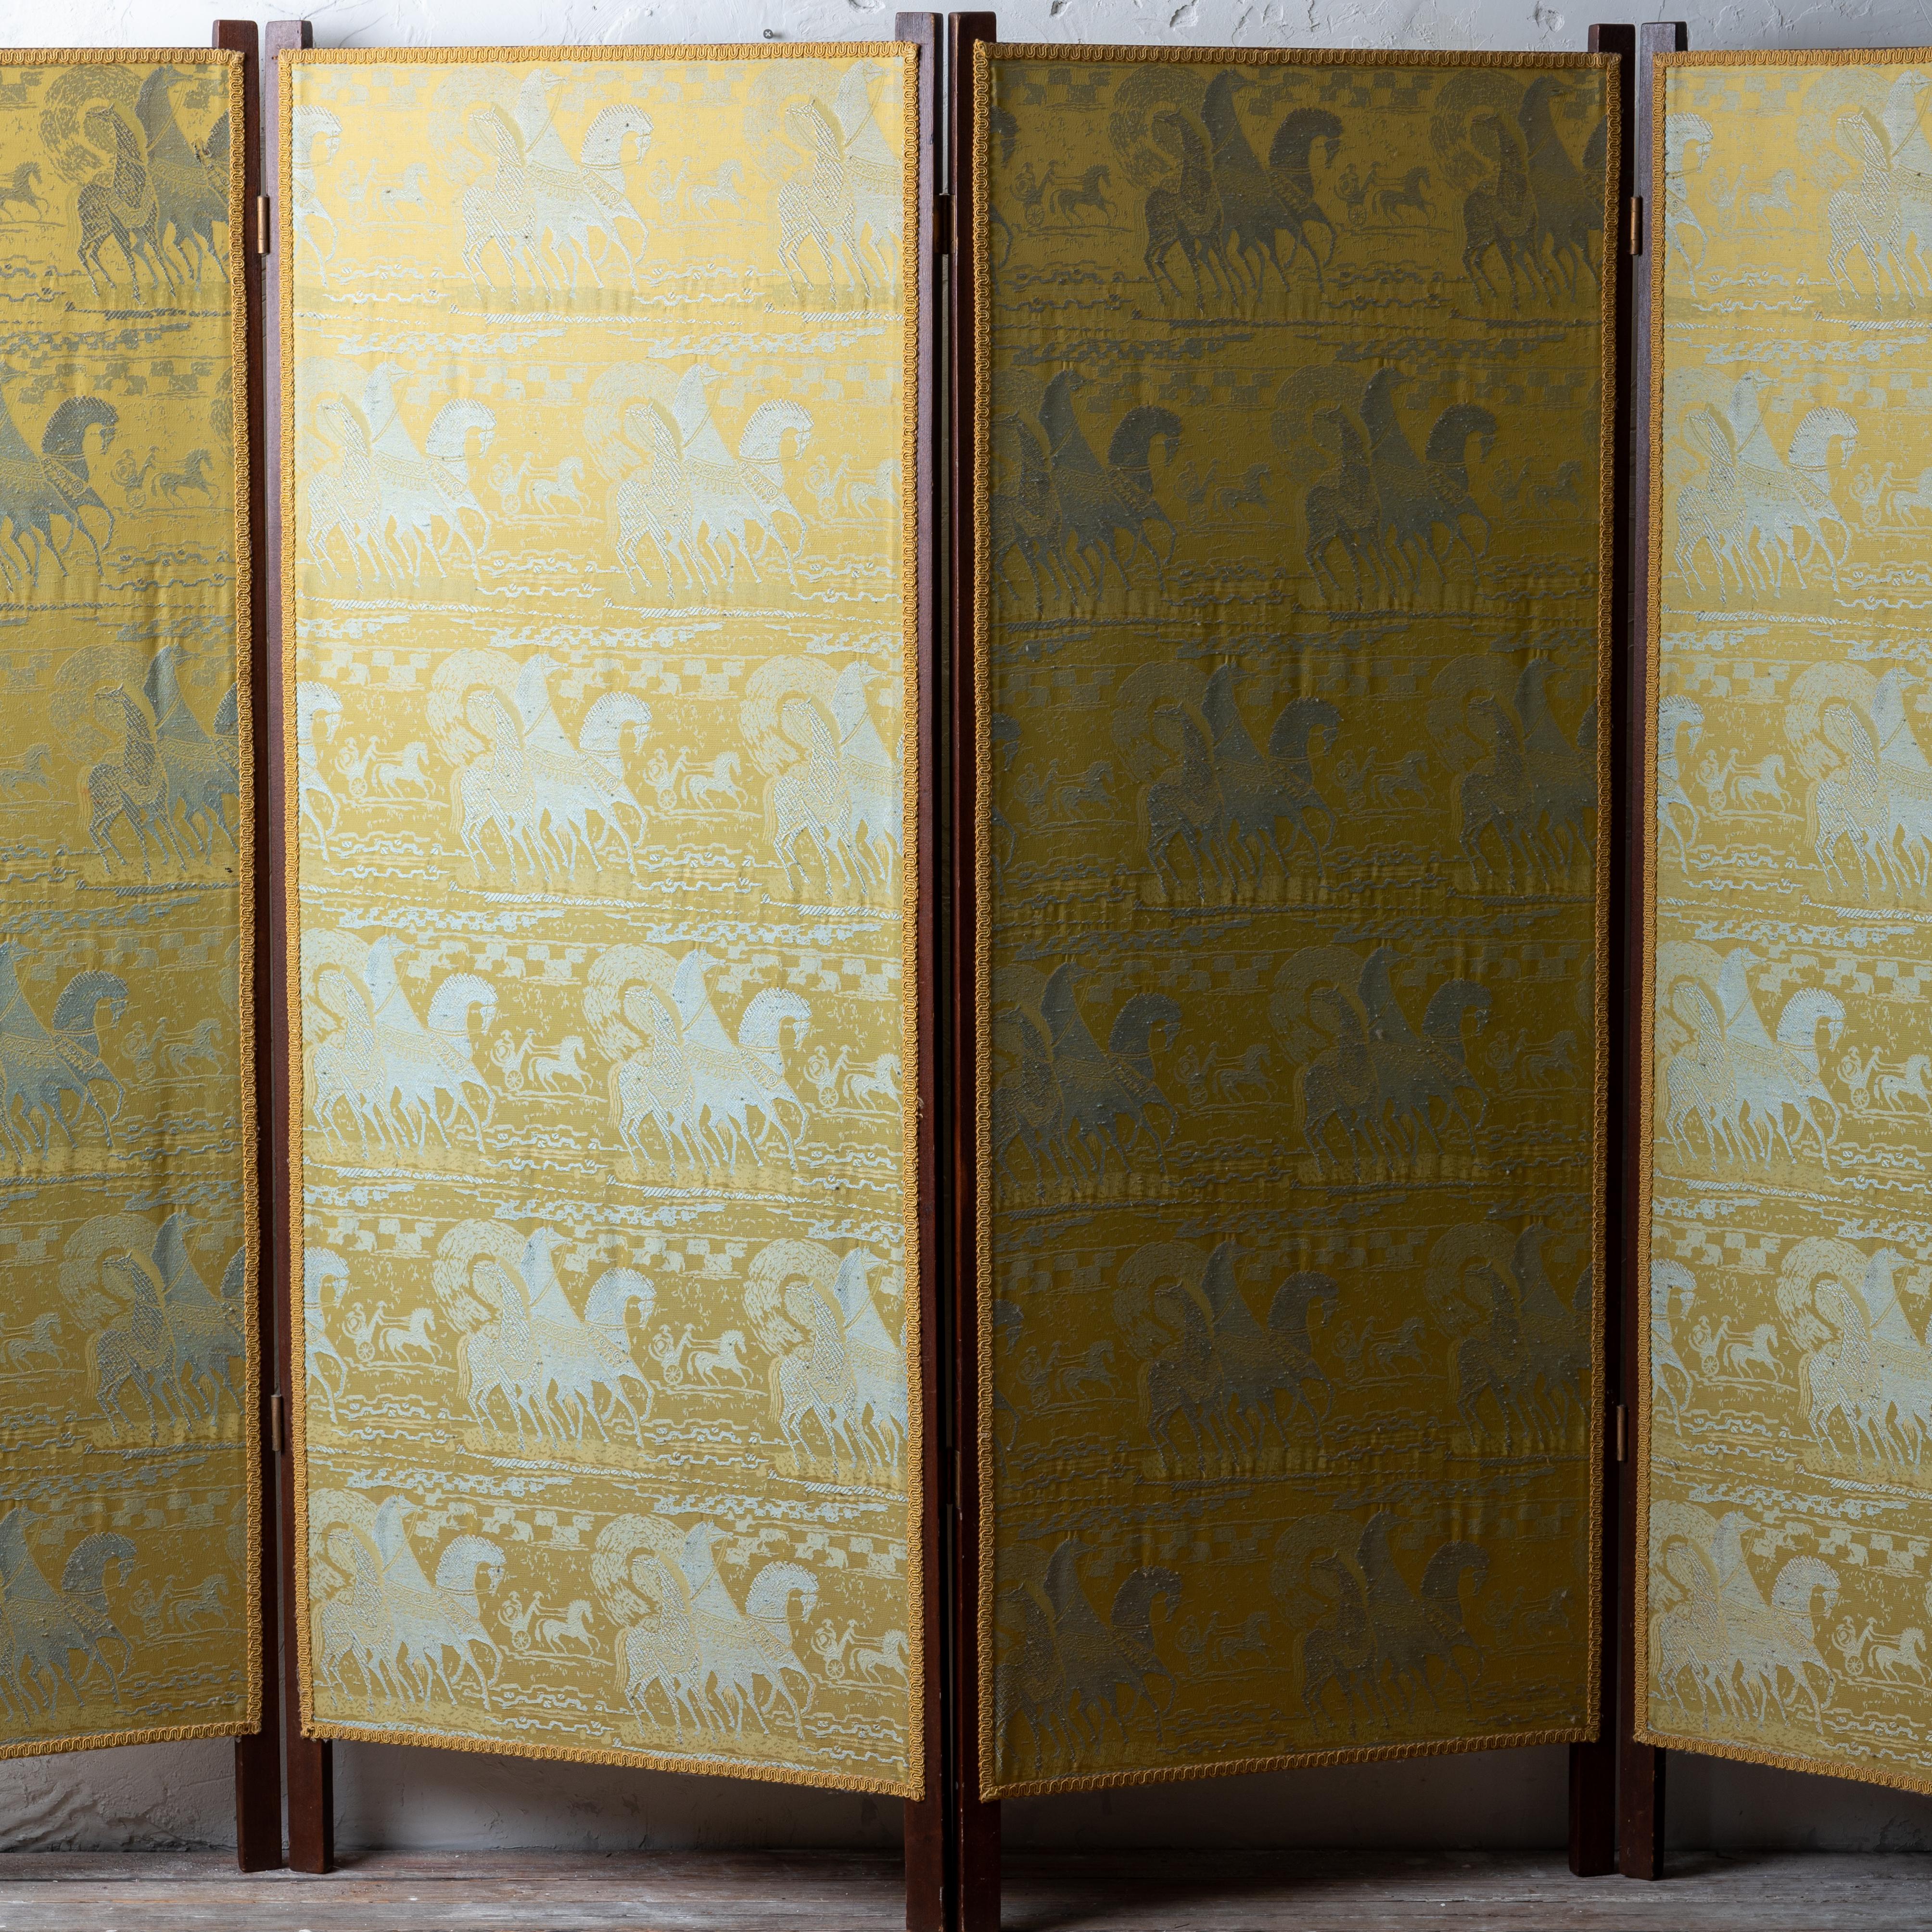 Folding Screen with Tibor Reich Etruscan Horse Fabric In Good Condition For Sale In Savannah, GA